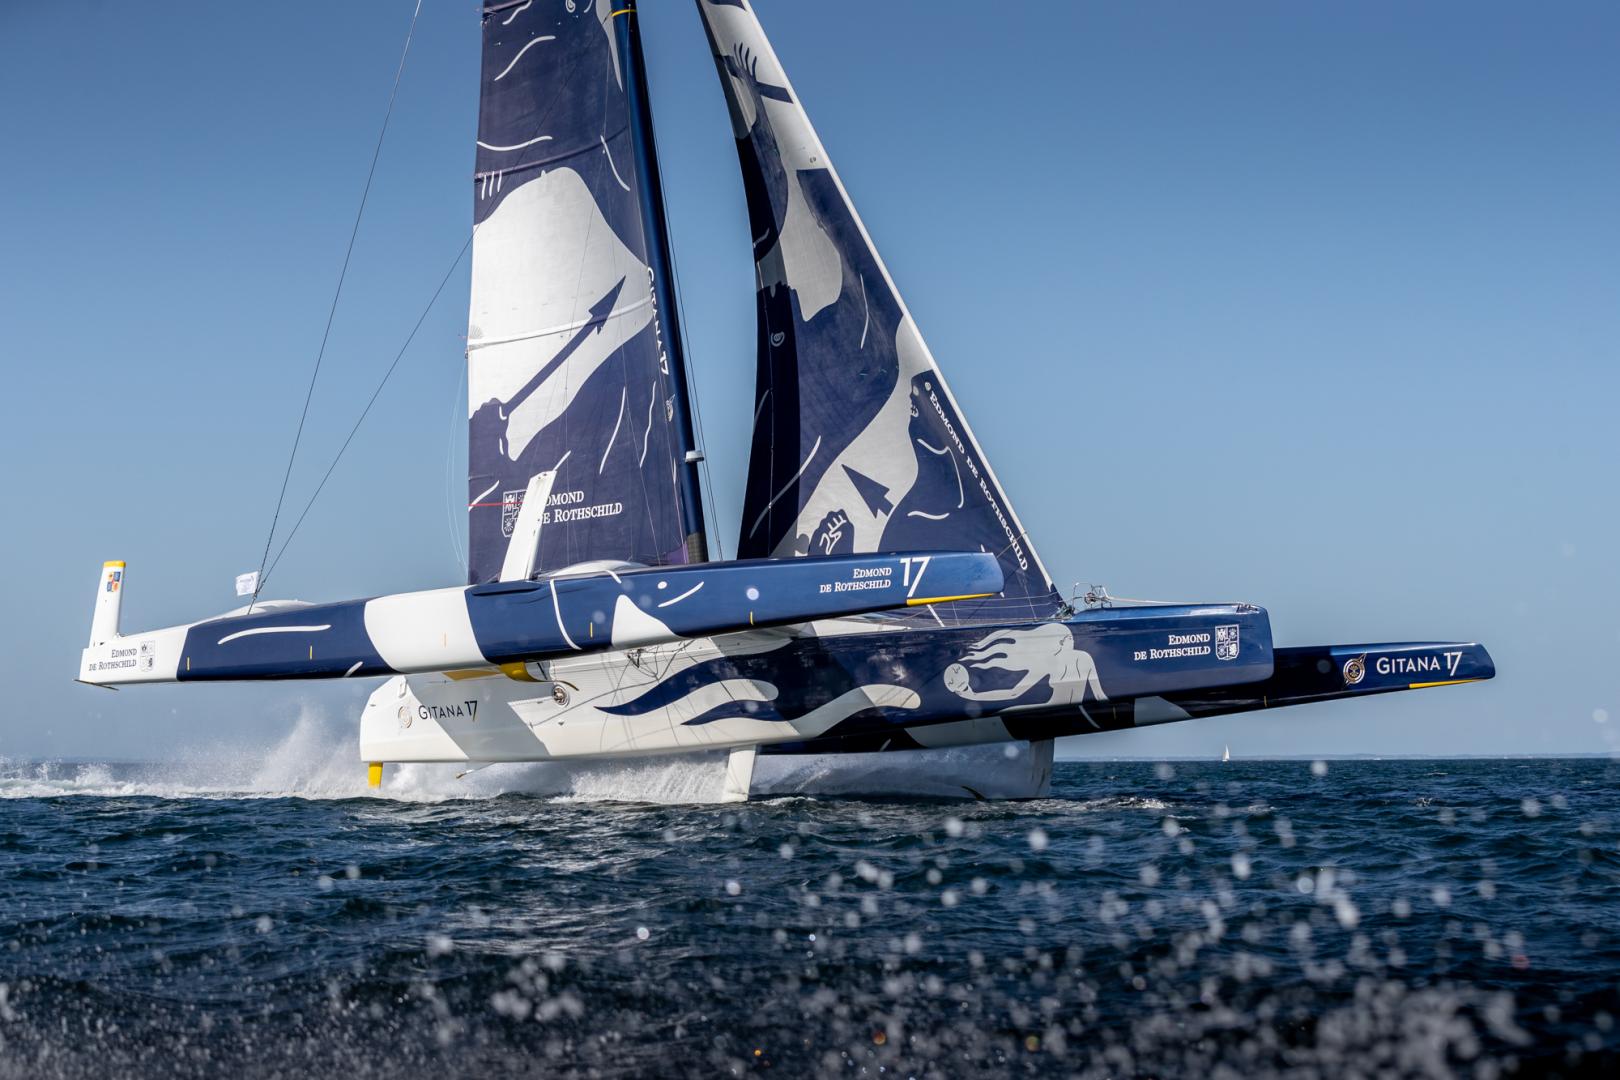 The Maxi Edmond de Rothschild takes the win in the Drheam Cup